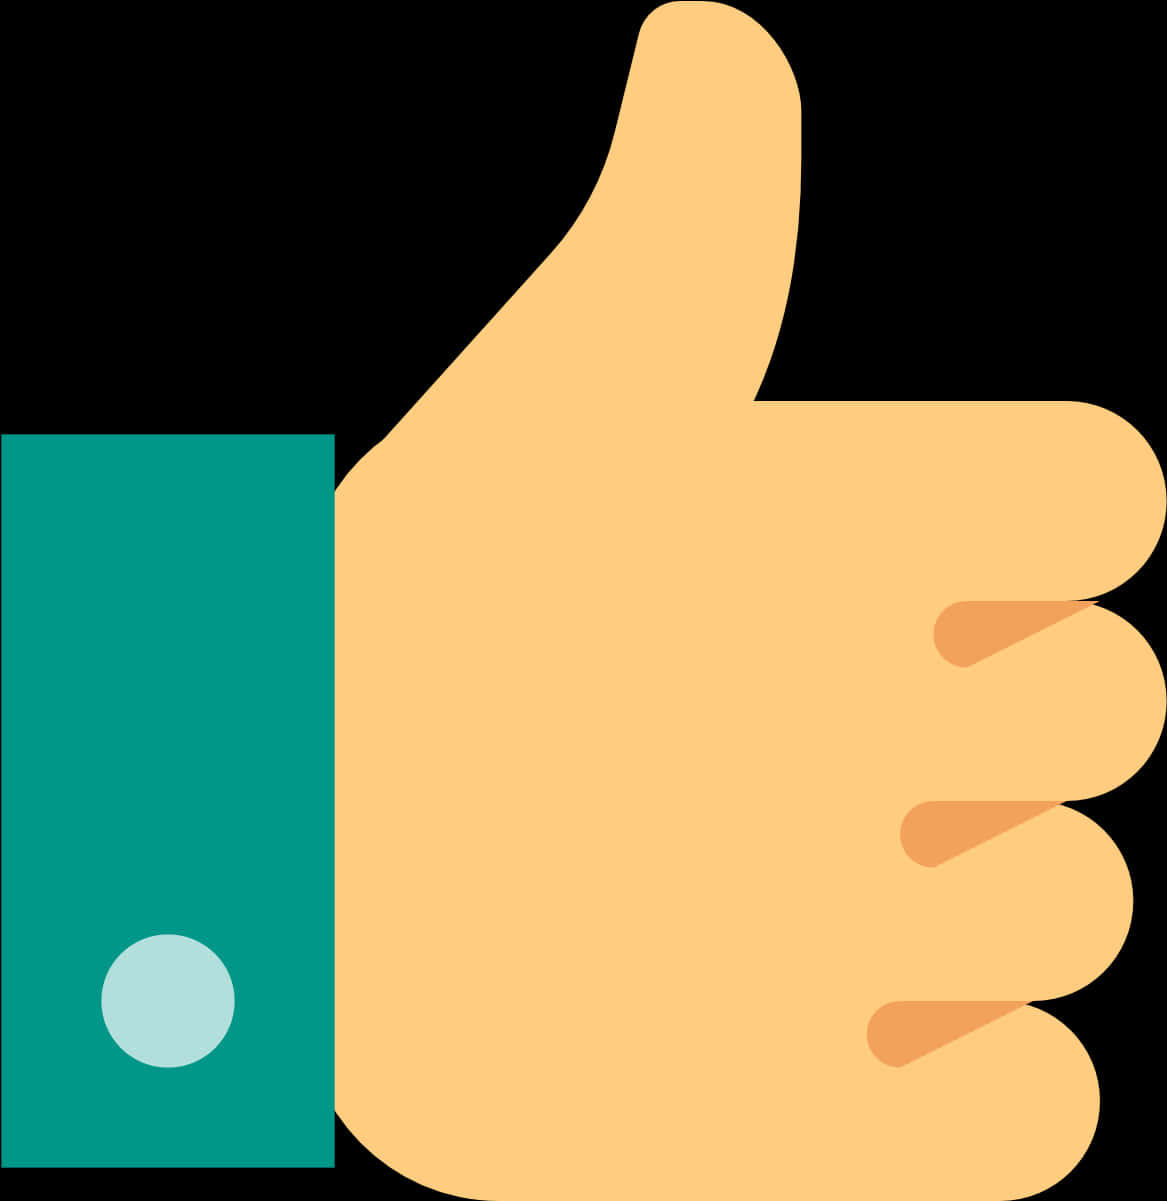 Thumbs Up Graphic With Green Cuff